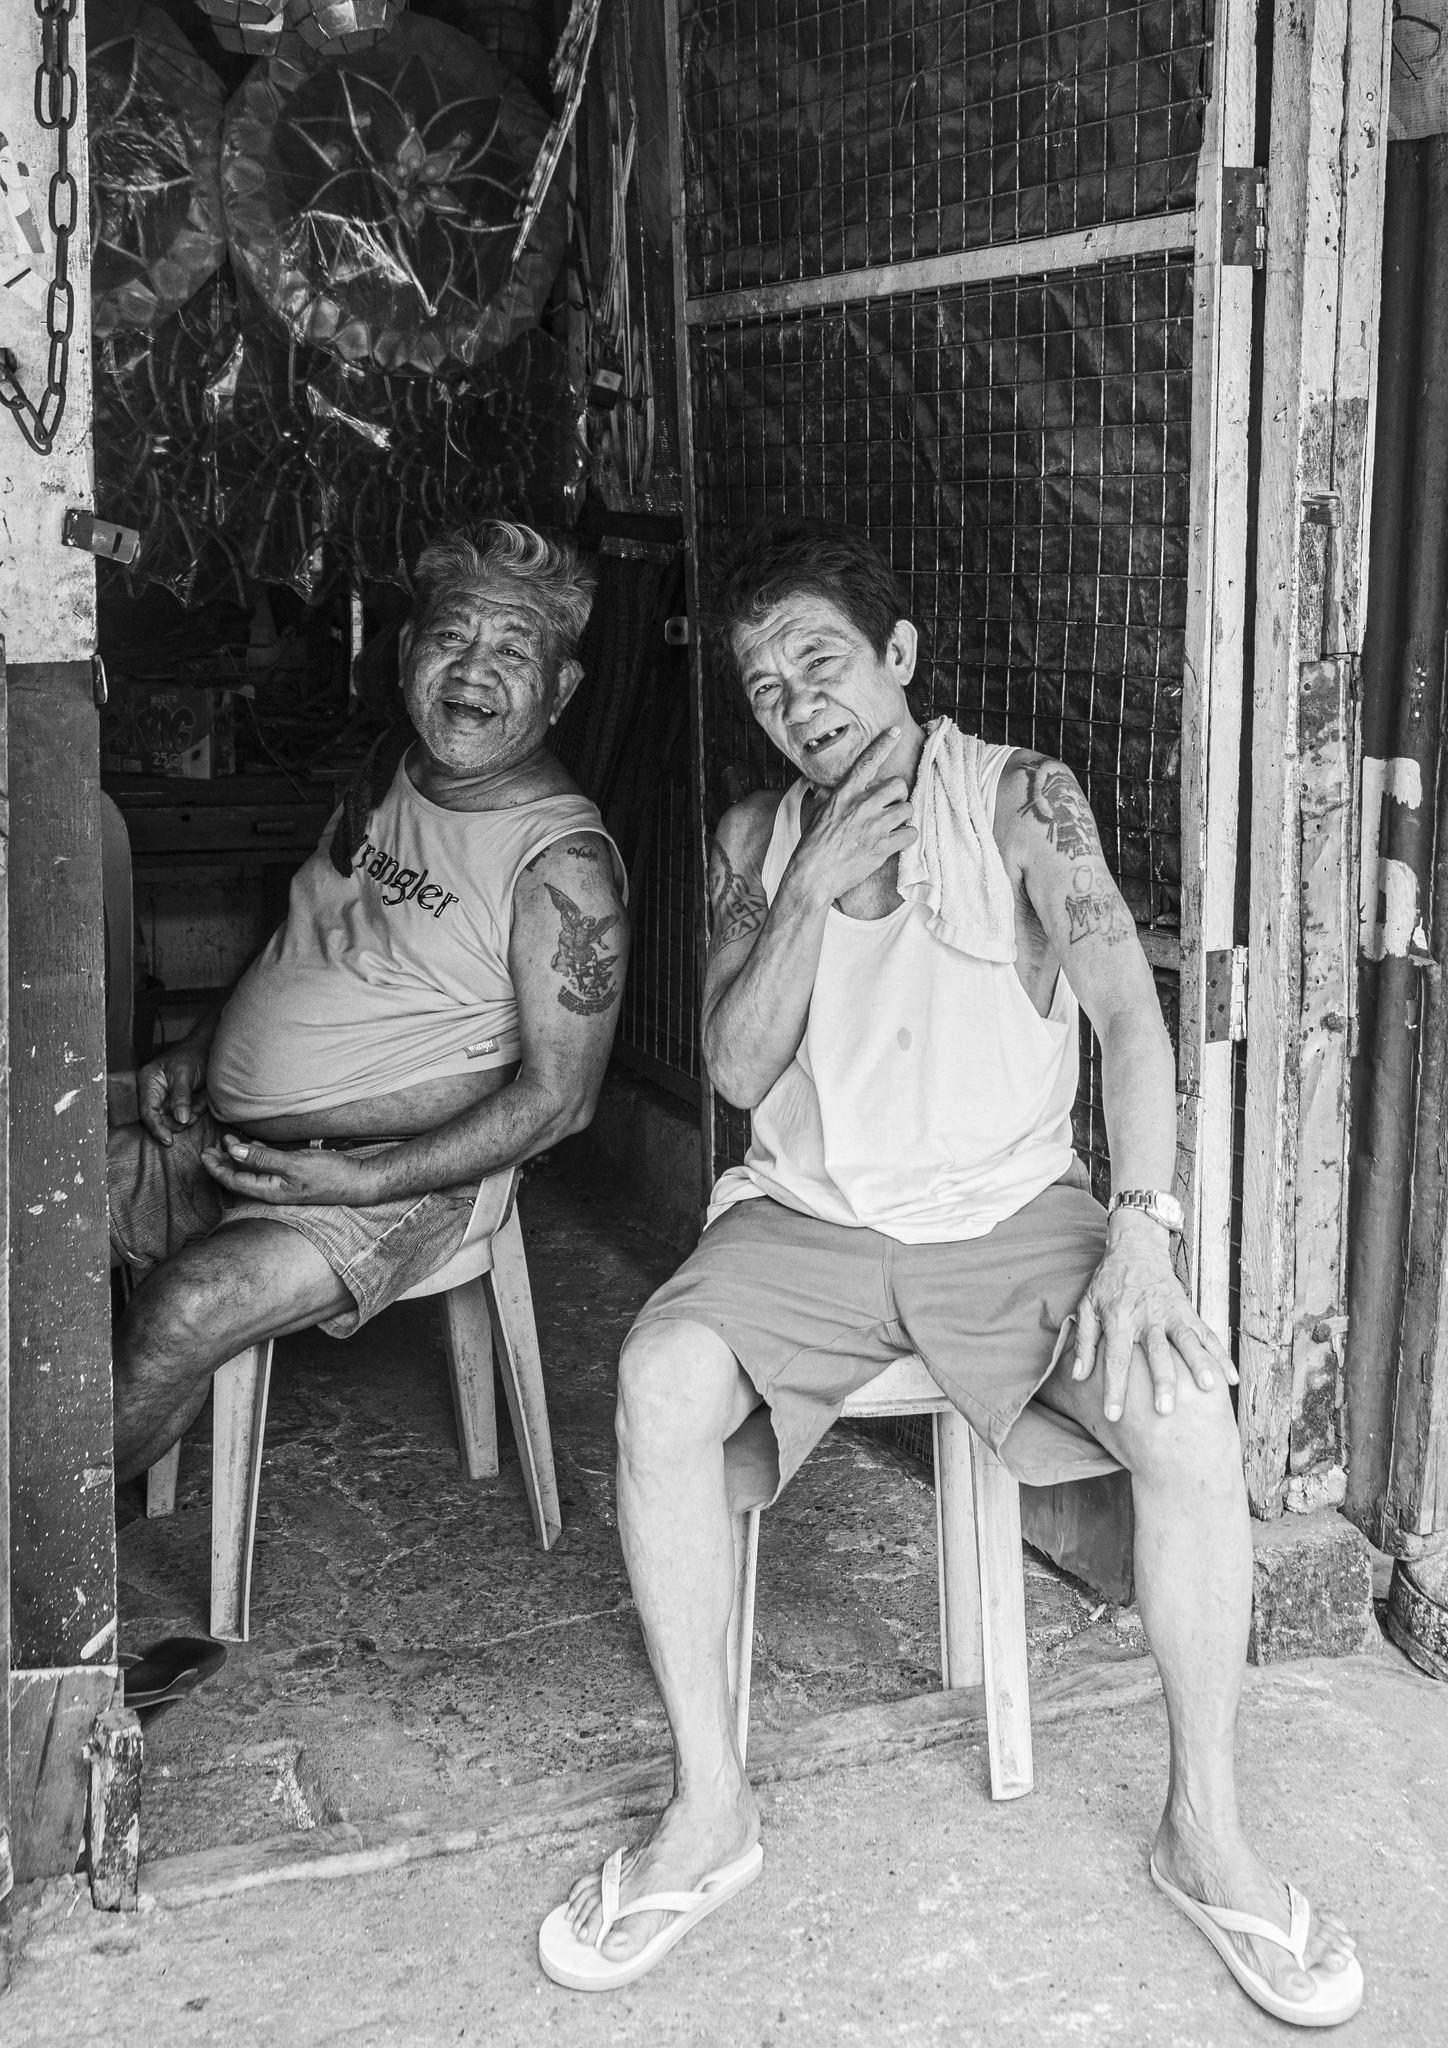 Two Happy Po’s (Sir’s) In Manila Philippines